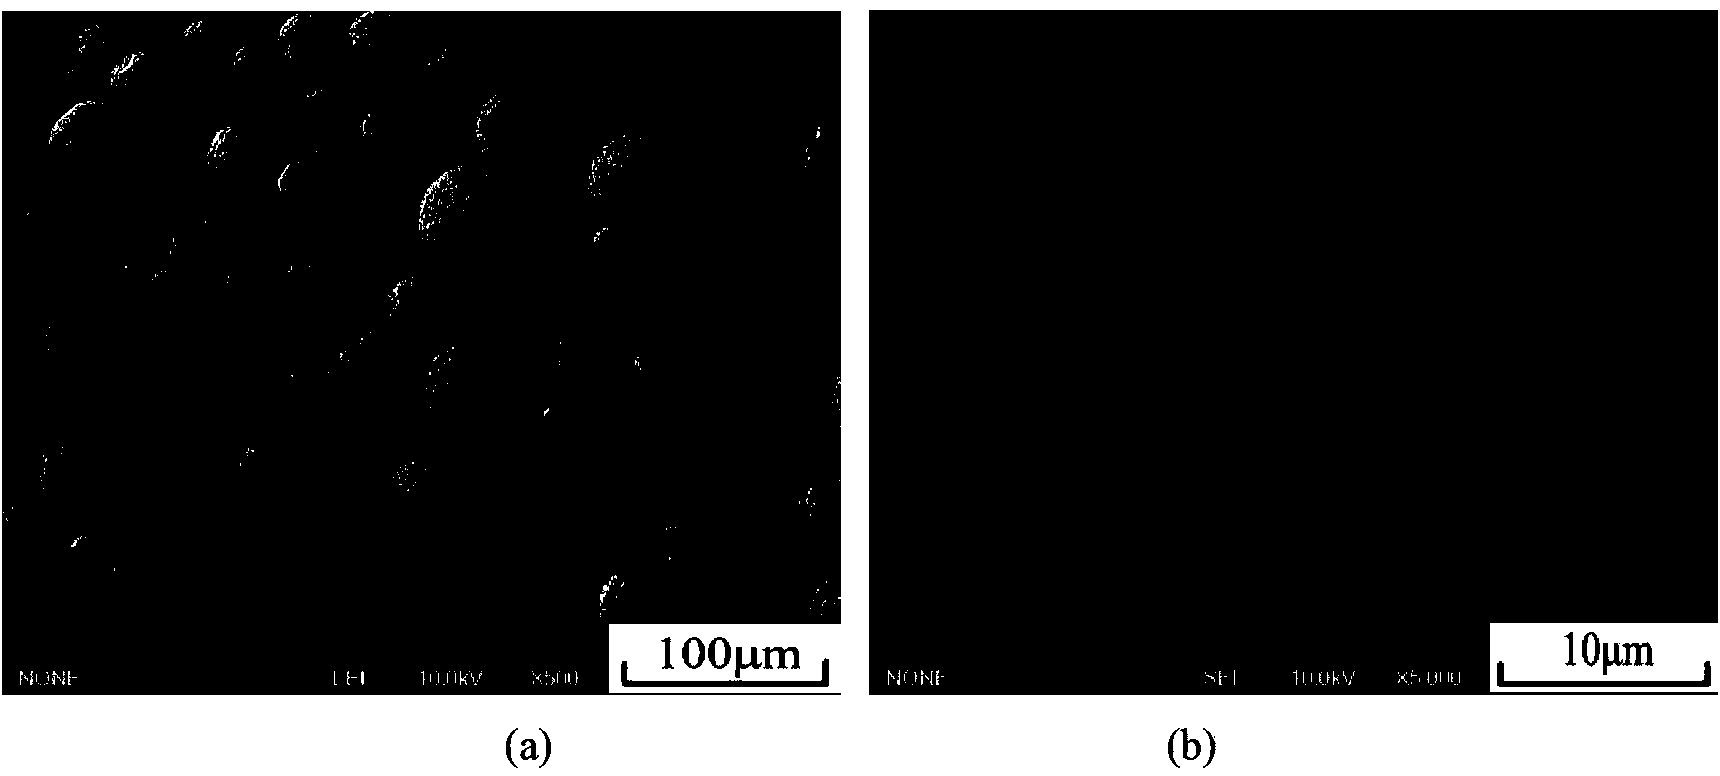 Fe-based metal glass composite coating enhanced by WC-Co as well as preparation method of the coating